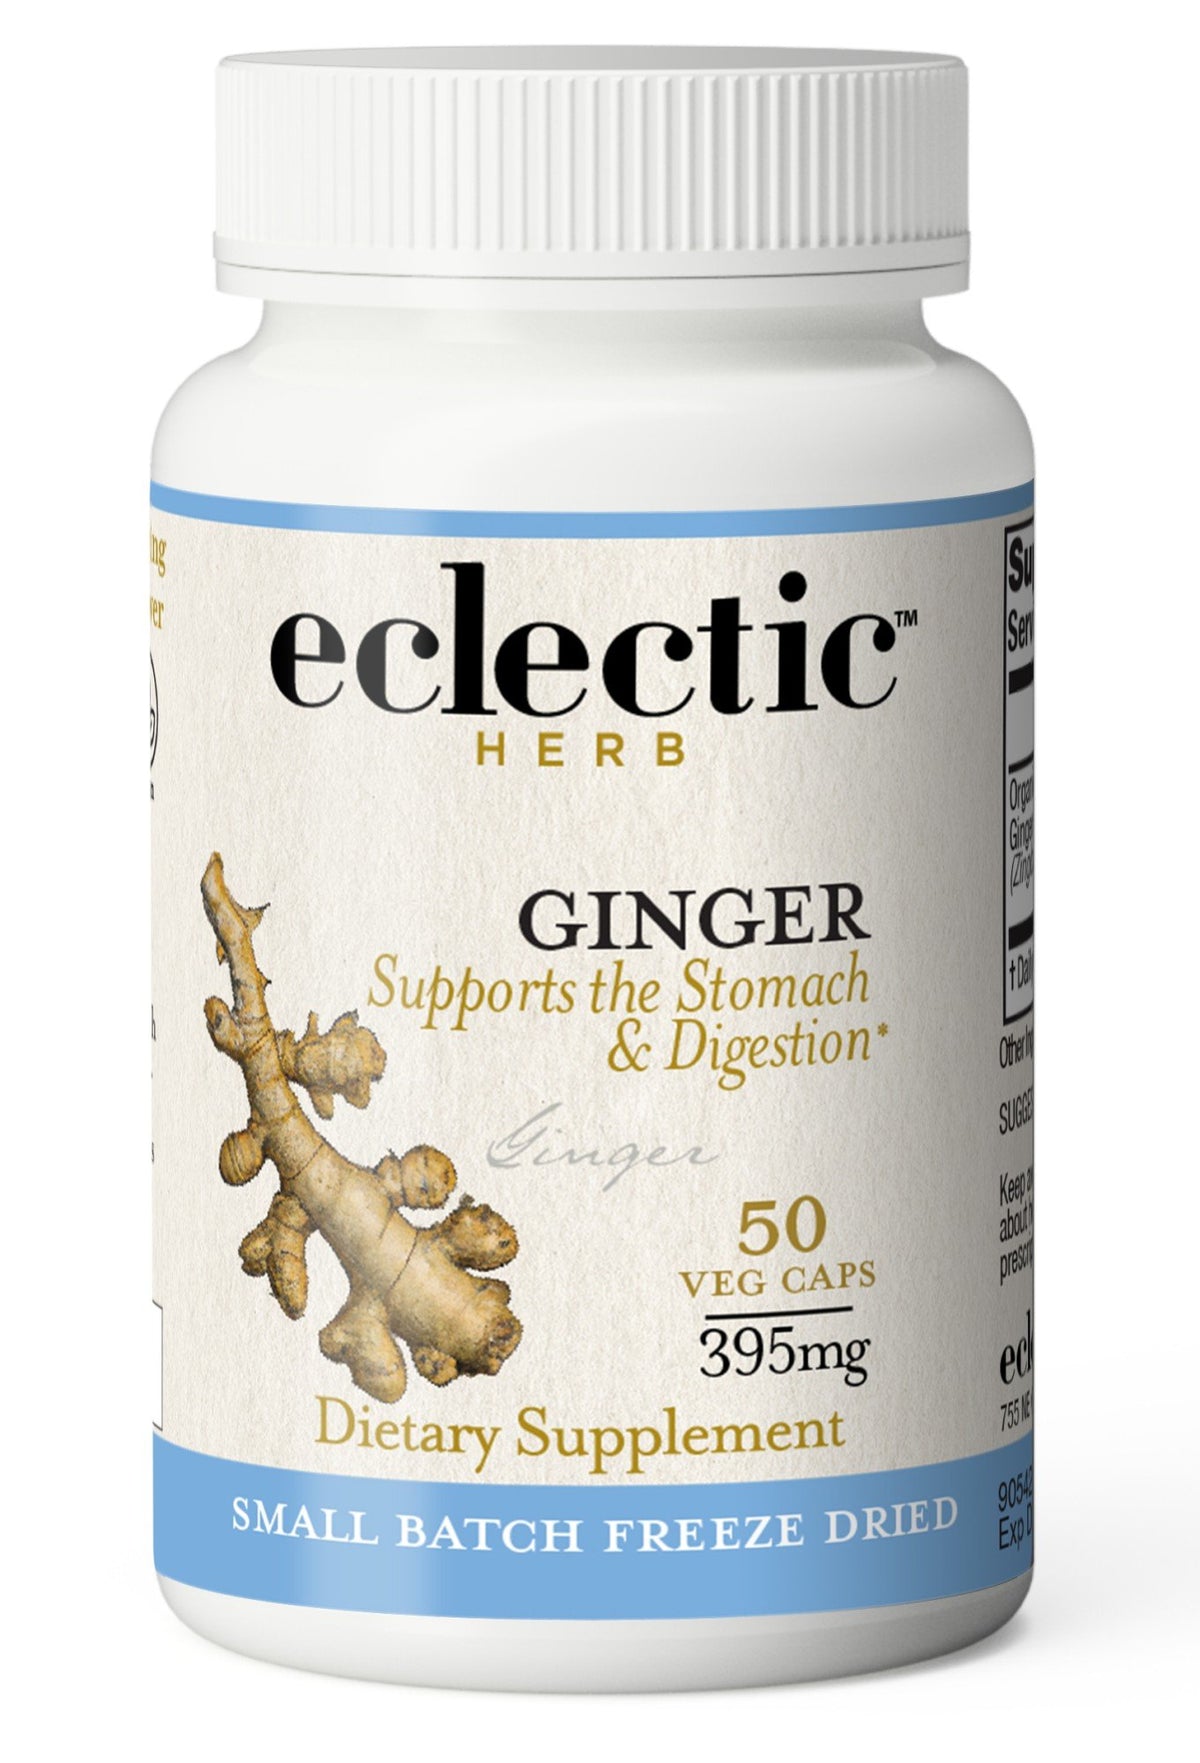 Eclectic Herb Ginger 395mg Freeze-Dried Organic 50 VegCap